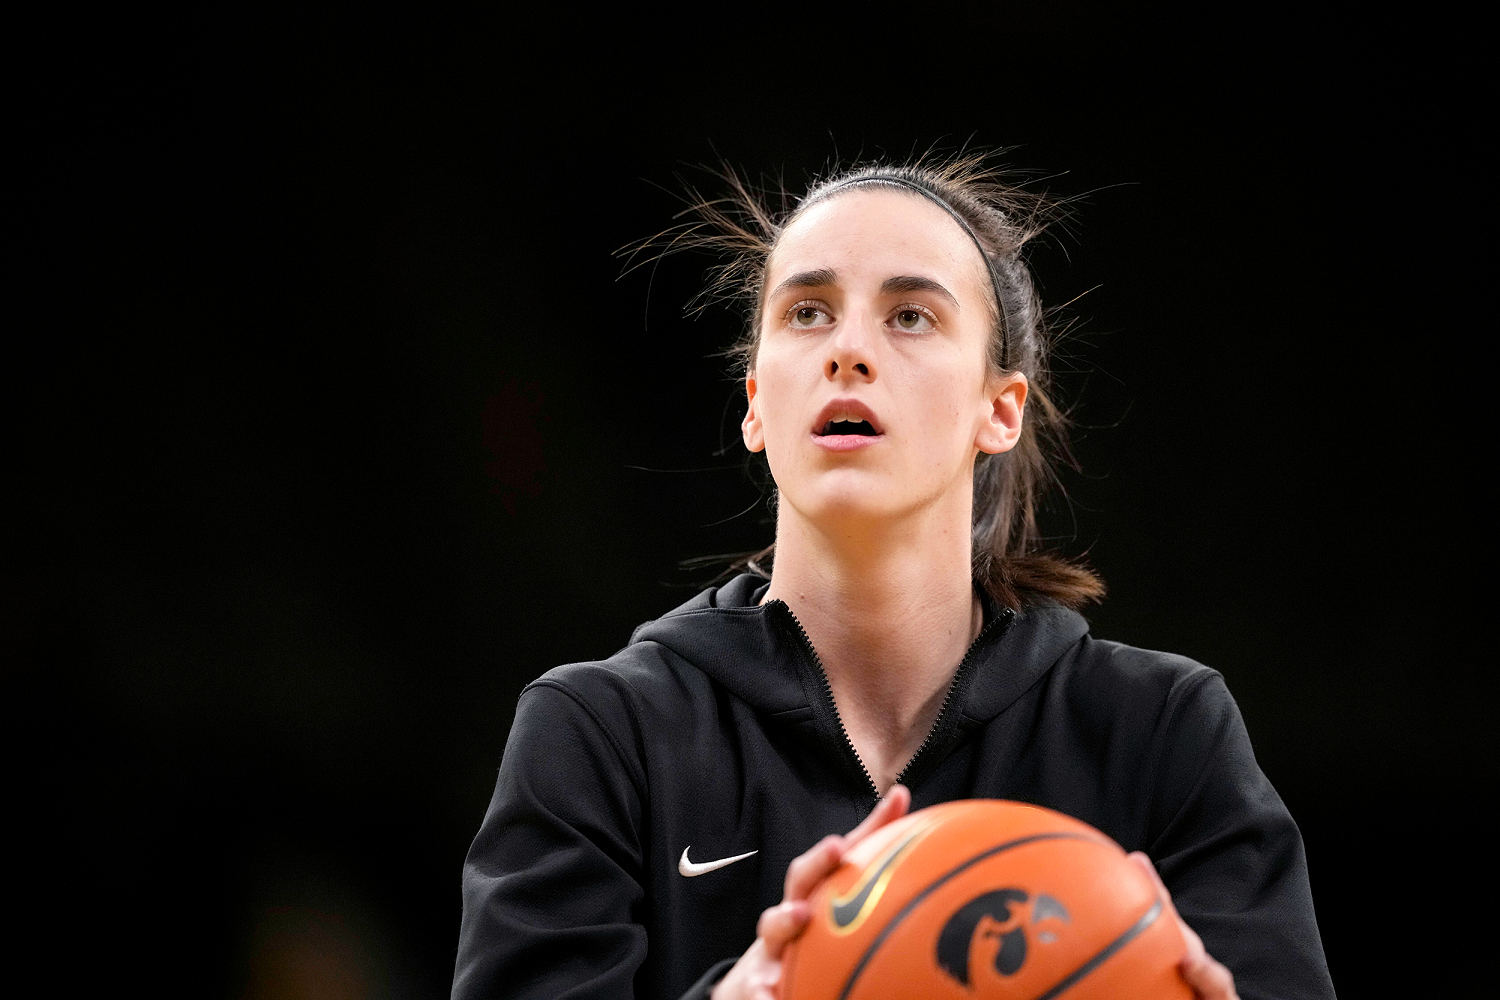 Iowa's Caitlin Clark becomes all-time NCAA women's scorer with 3,528 career points — and counting